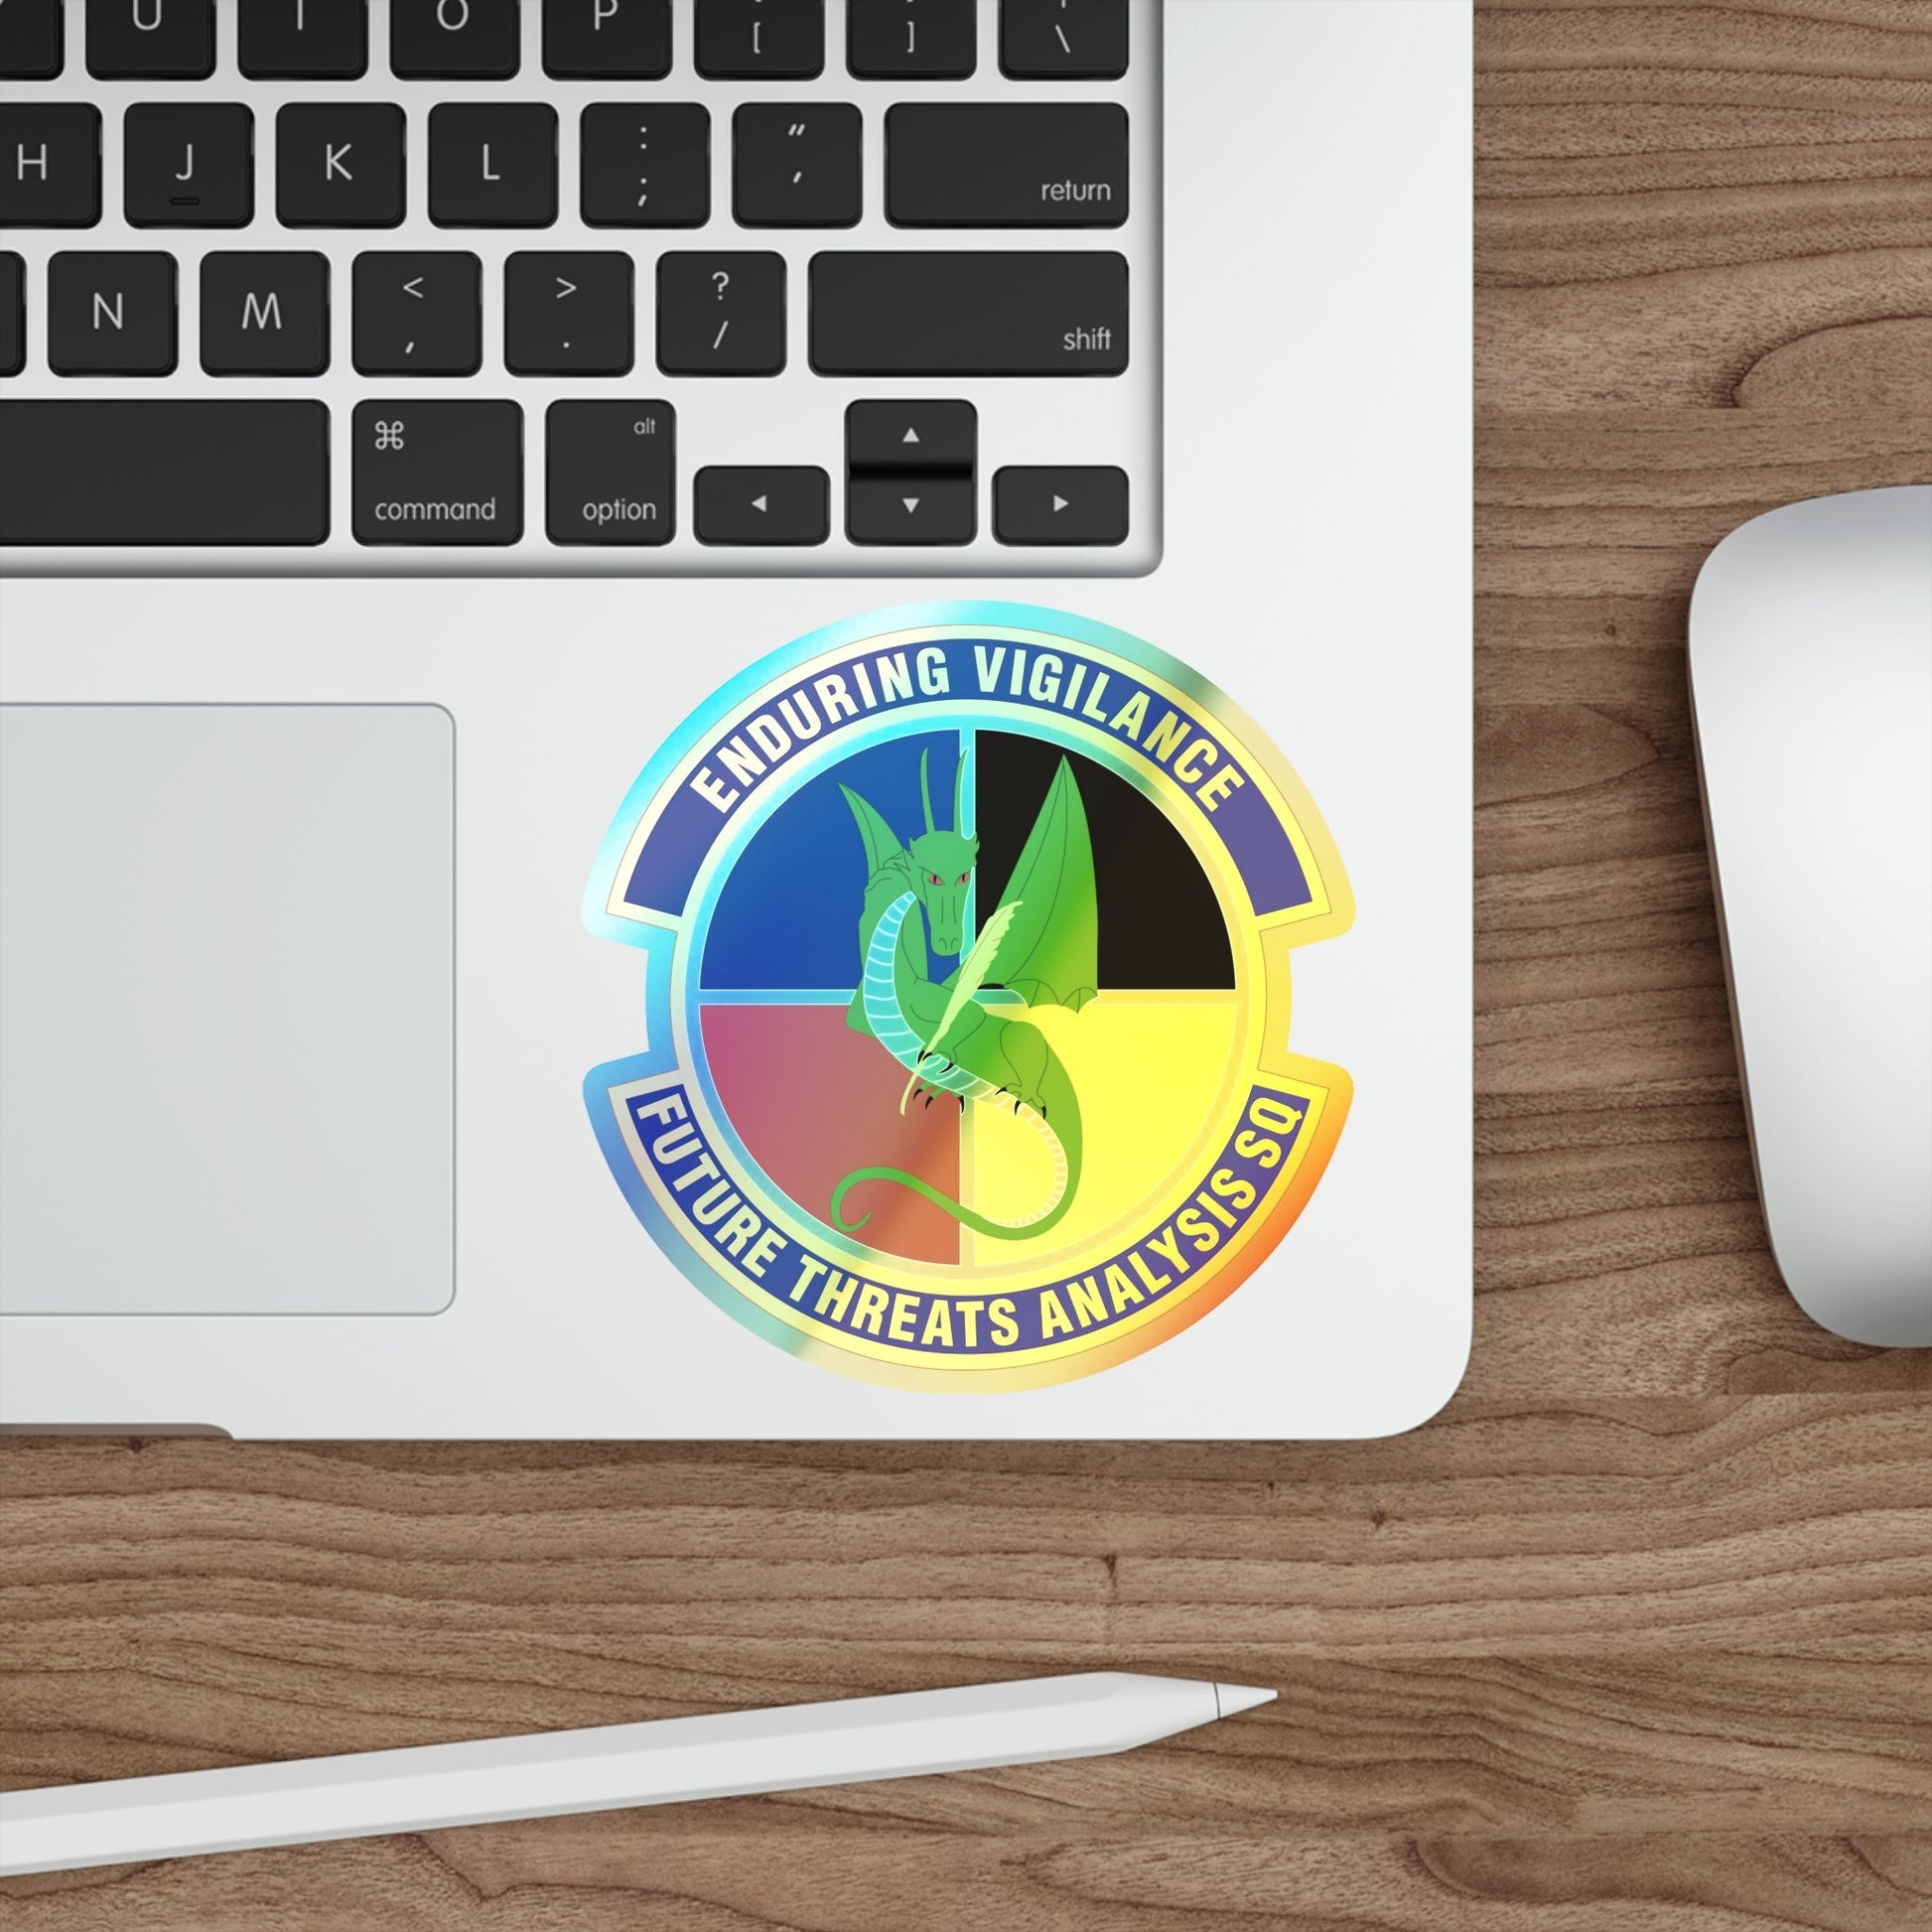 Future Threats Analysis Squadron (U.S. Air Force) Holographic STICKER Die-Cut Vinyl Decal-The Sticker Space